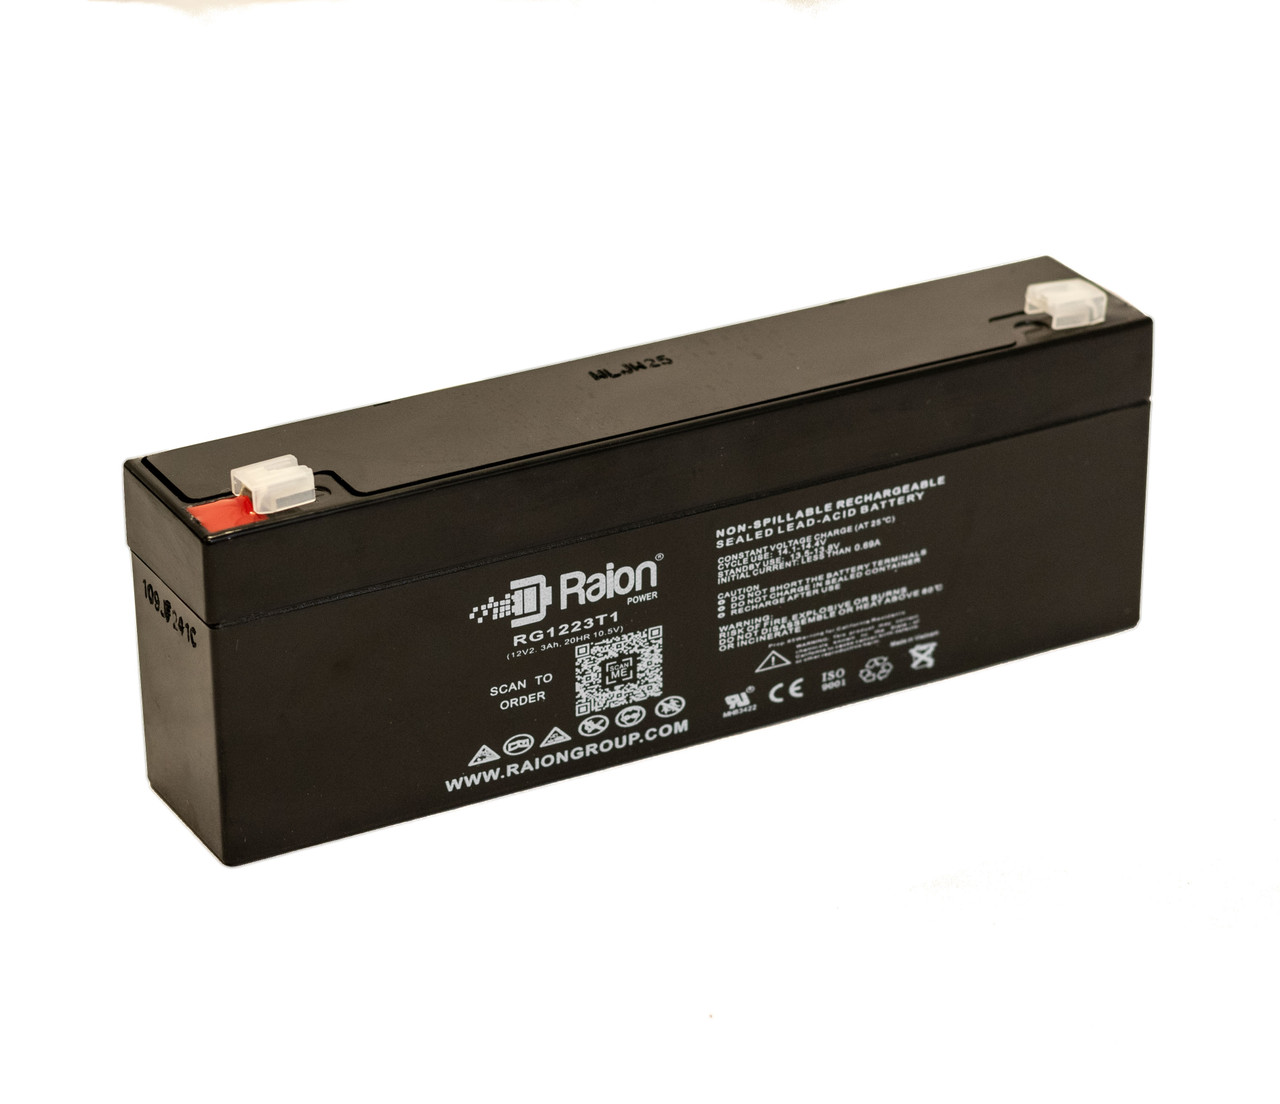 Raion Power RG1223T1 Replacement Battery for Ivac Medical Systems 302787